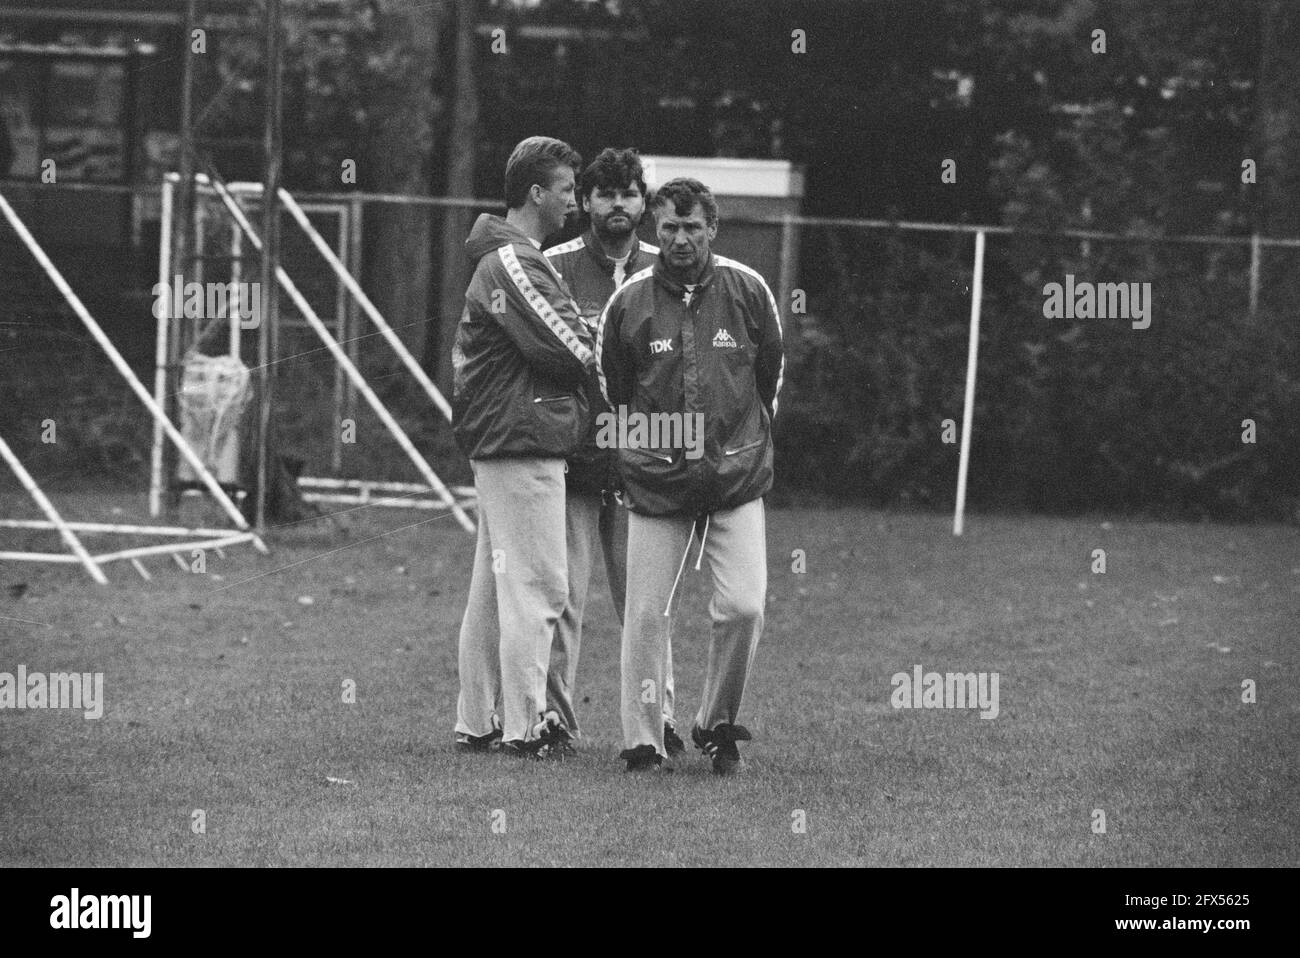 Ajax board resigned; from left to right trainer trio Louis van Gaal, Barry Hulshoff and Spitz Kohn during training, September 26, 1988, sports, trainers, soccer, The Netherlands, 20th century press agency photo, news to remember, documentary, historic photography 1945-1990, visual stories, human history of the Twentieth Century, capturing moments in time Stock Photo